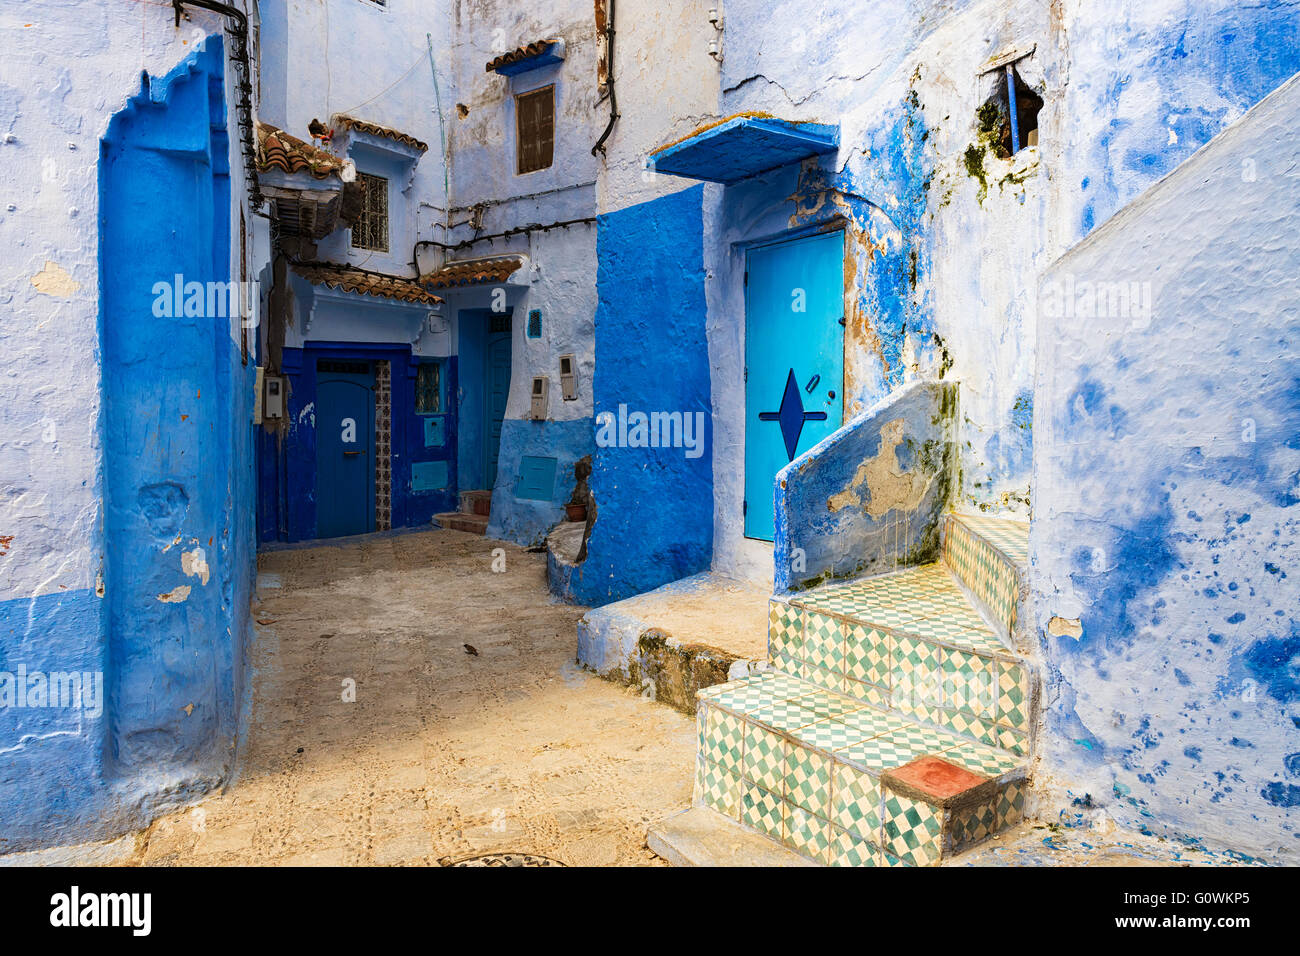 View of an alley in the town of Chefchaouen in Morocco Stock Photo